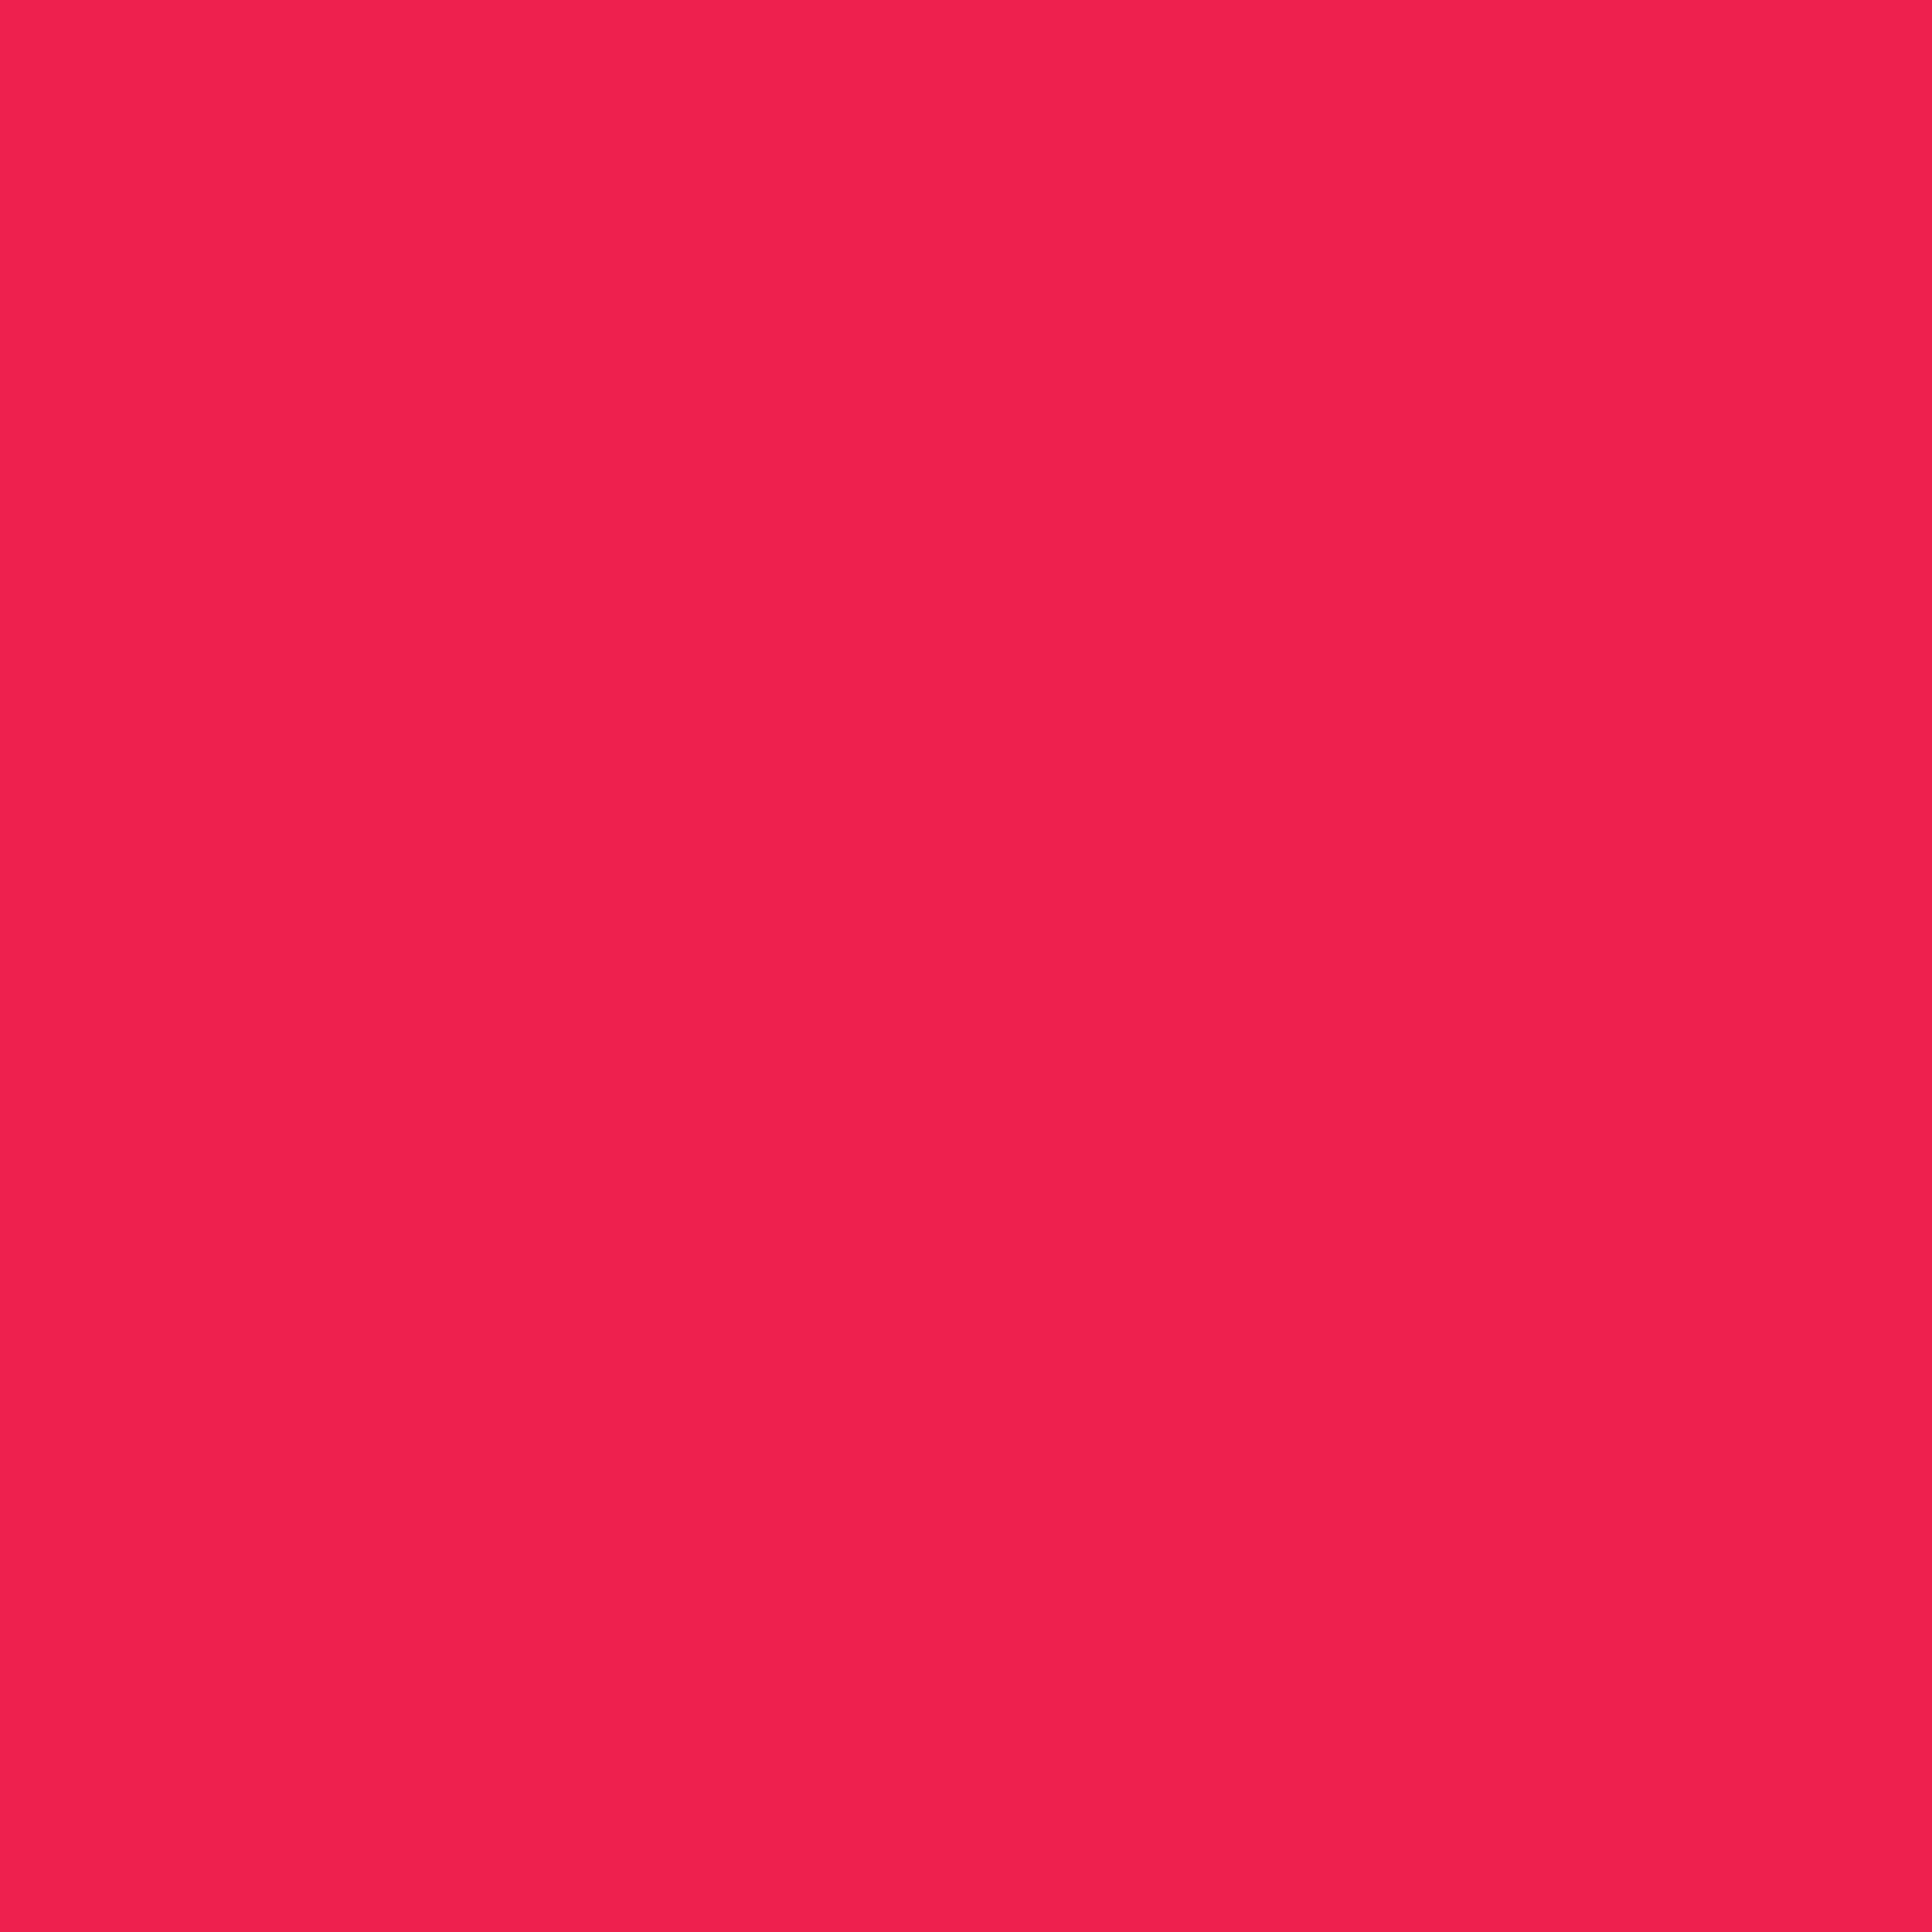 3600x3600 Red Crayola Solid Color Background